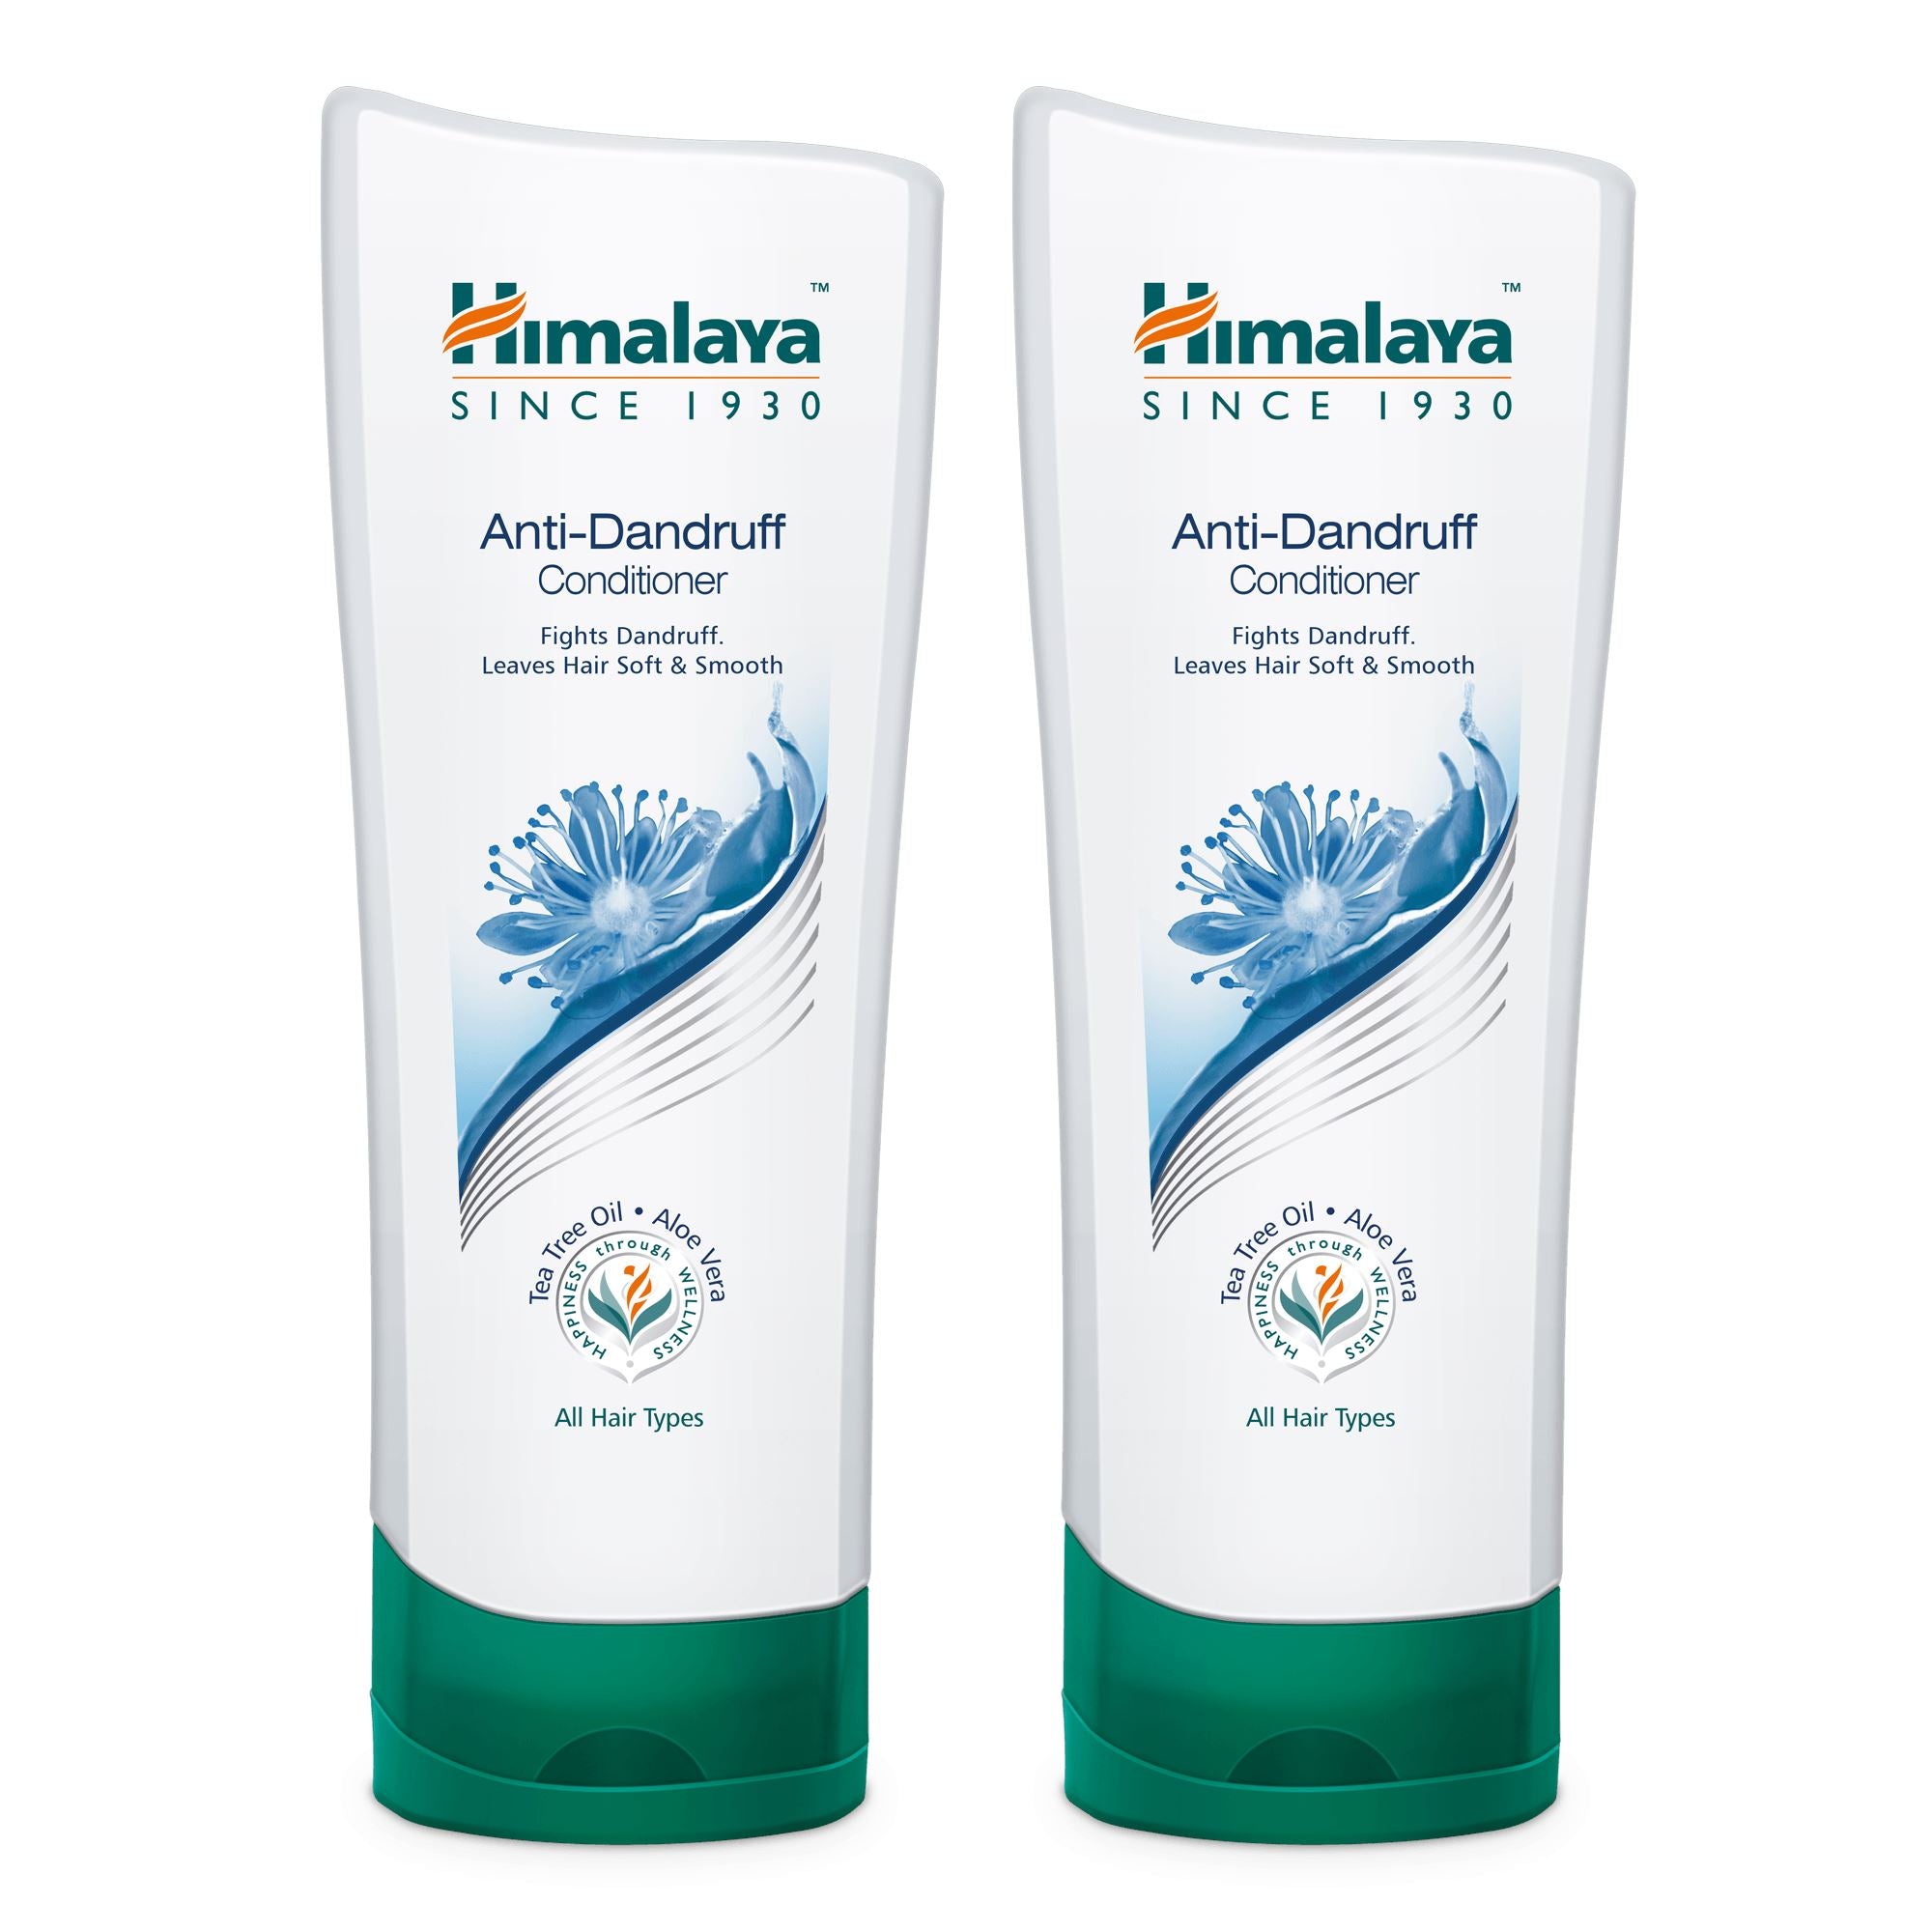 Himalaya Anti-Dandruff Conditioner 100ml (Pack of 2) - Fights dandruff and leaves hair soft and smooth